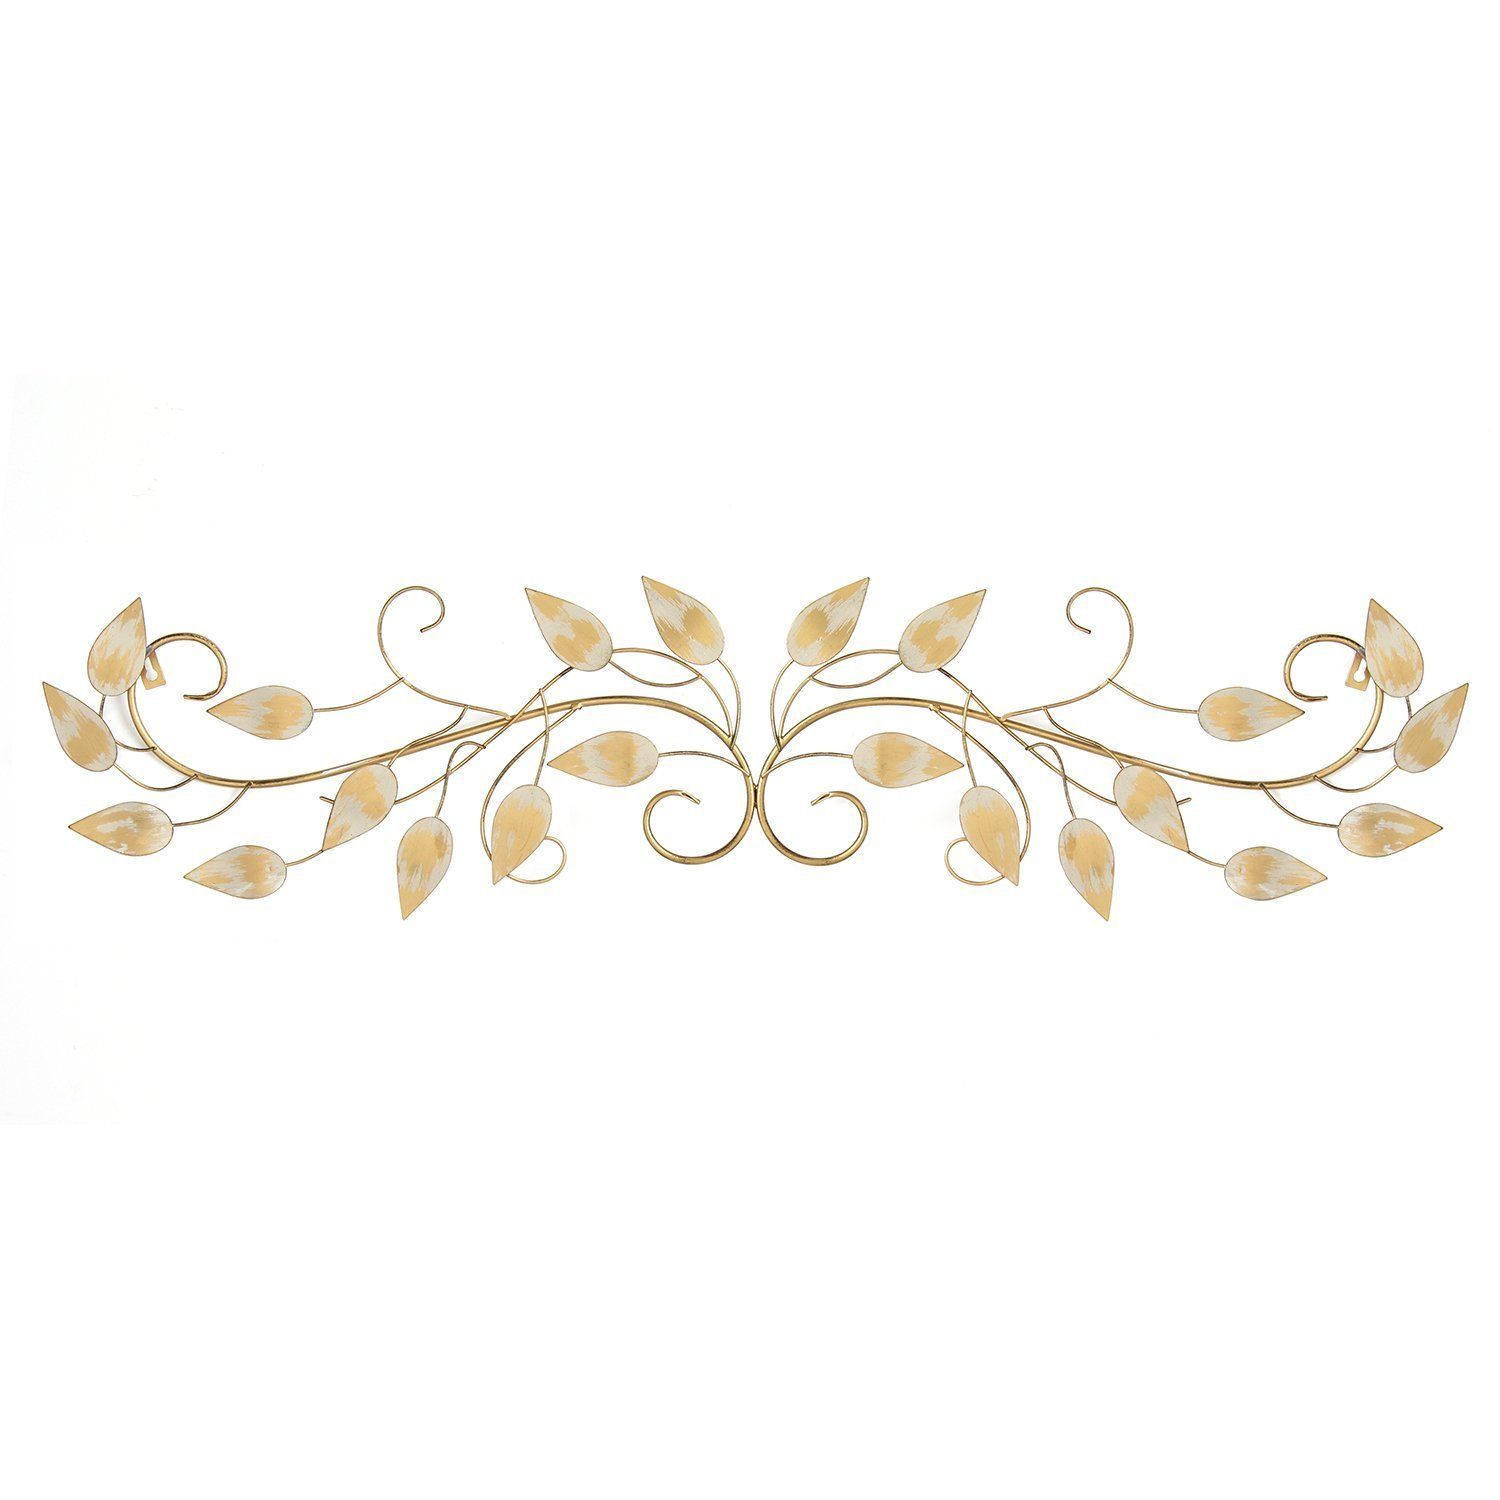 Brushed Gold Over The Door Metal Wall Decor In 2021 | Stratton Home Within Most Recently Released Brushed Gold Wall Art (View 11 of 20)